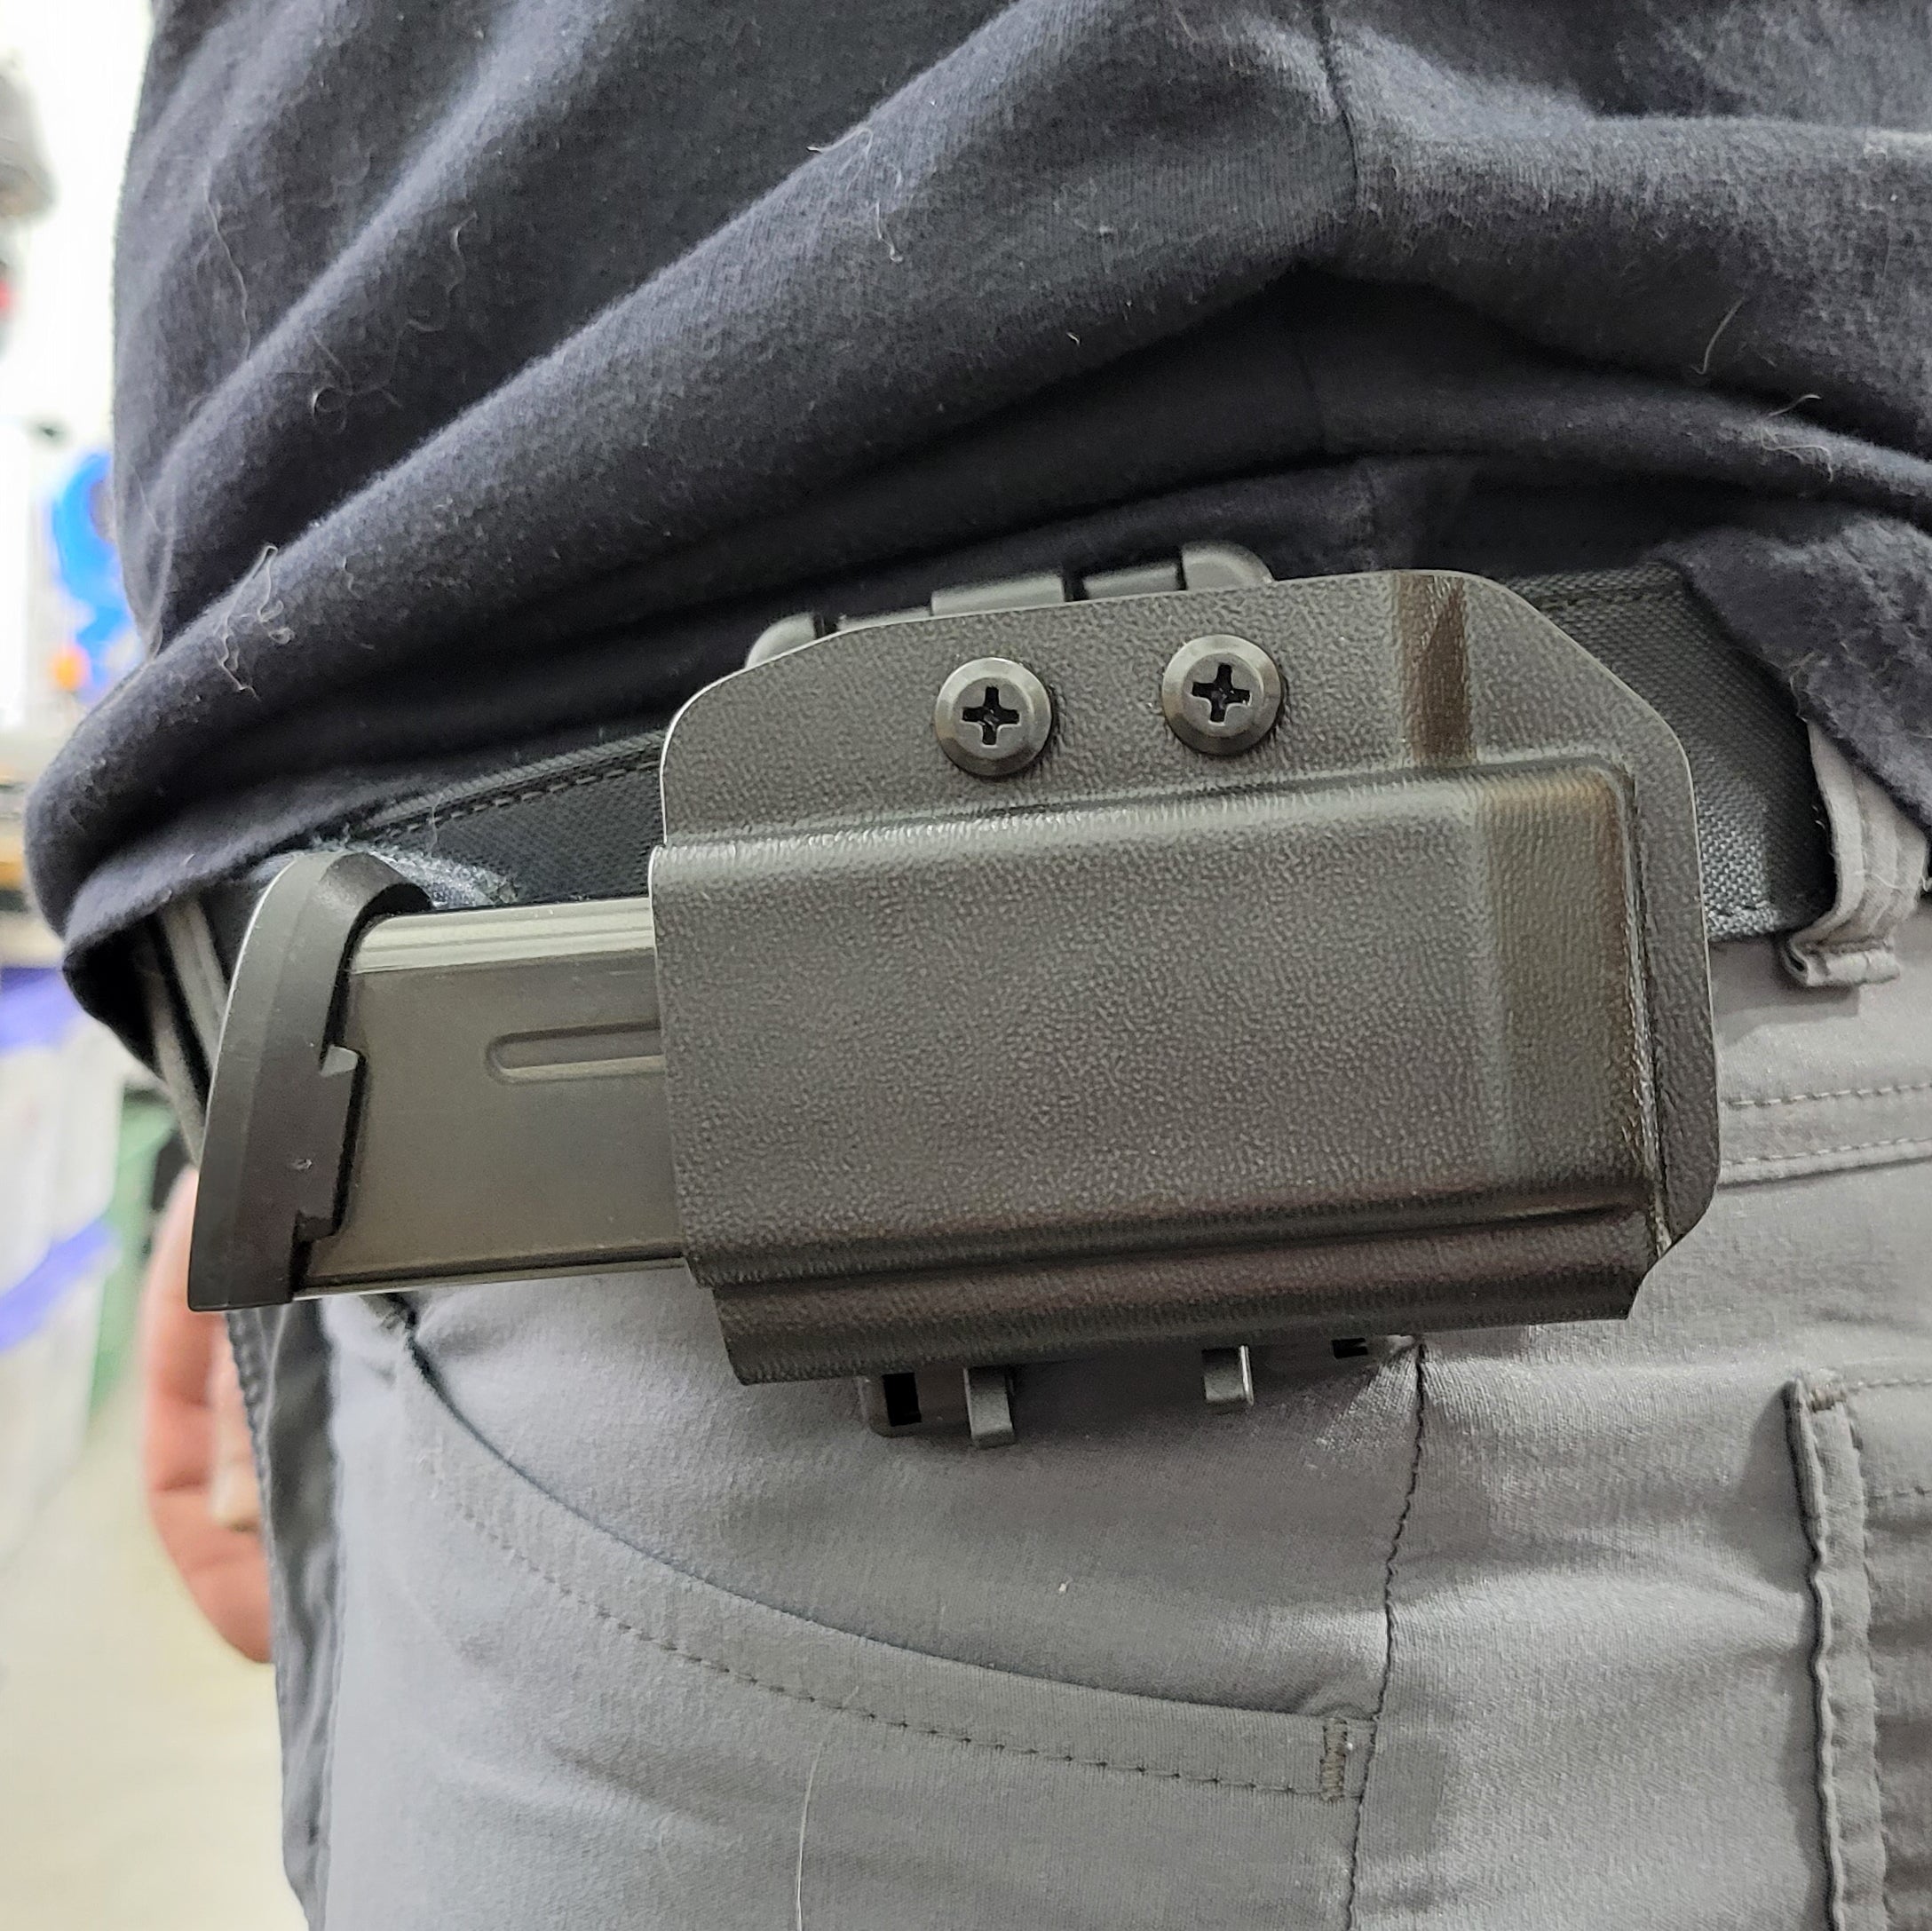 For the Best, most comfortable,  Kydex OWB Outside Waistband magazine pouch for FN Reflex, shop Four Brothers Holsters. Suitable for belt widths of 1 1/2", 1 3/4". 2" & 2 1/2" Adjustable retention and cant outside waist carrier holster Hellcat Pro, Sig P365XL, Glock 43X & 48, Smith & Wesson Equalizer & Shield Plus 9mm